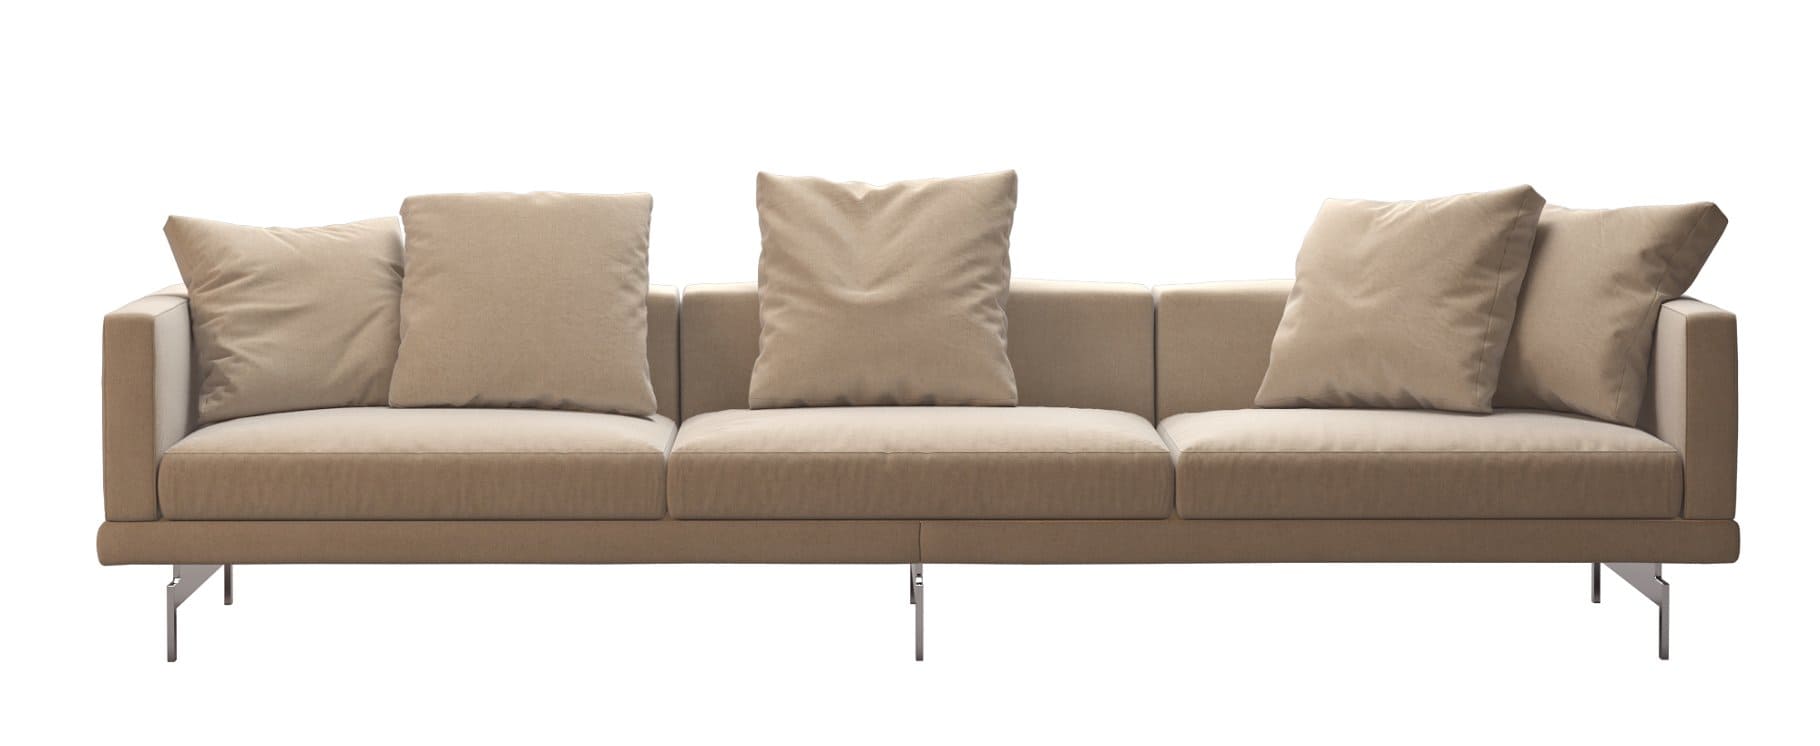 Large Dock sofa from bb italia 295x99 beige color.